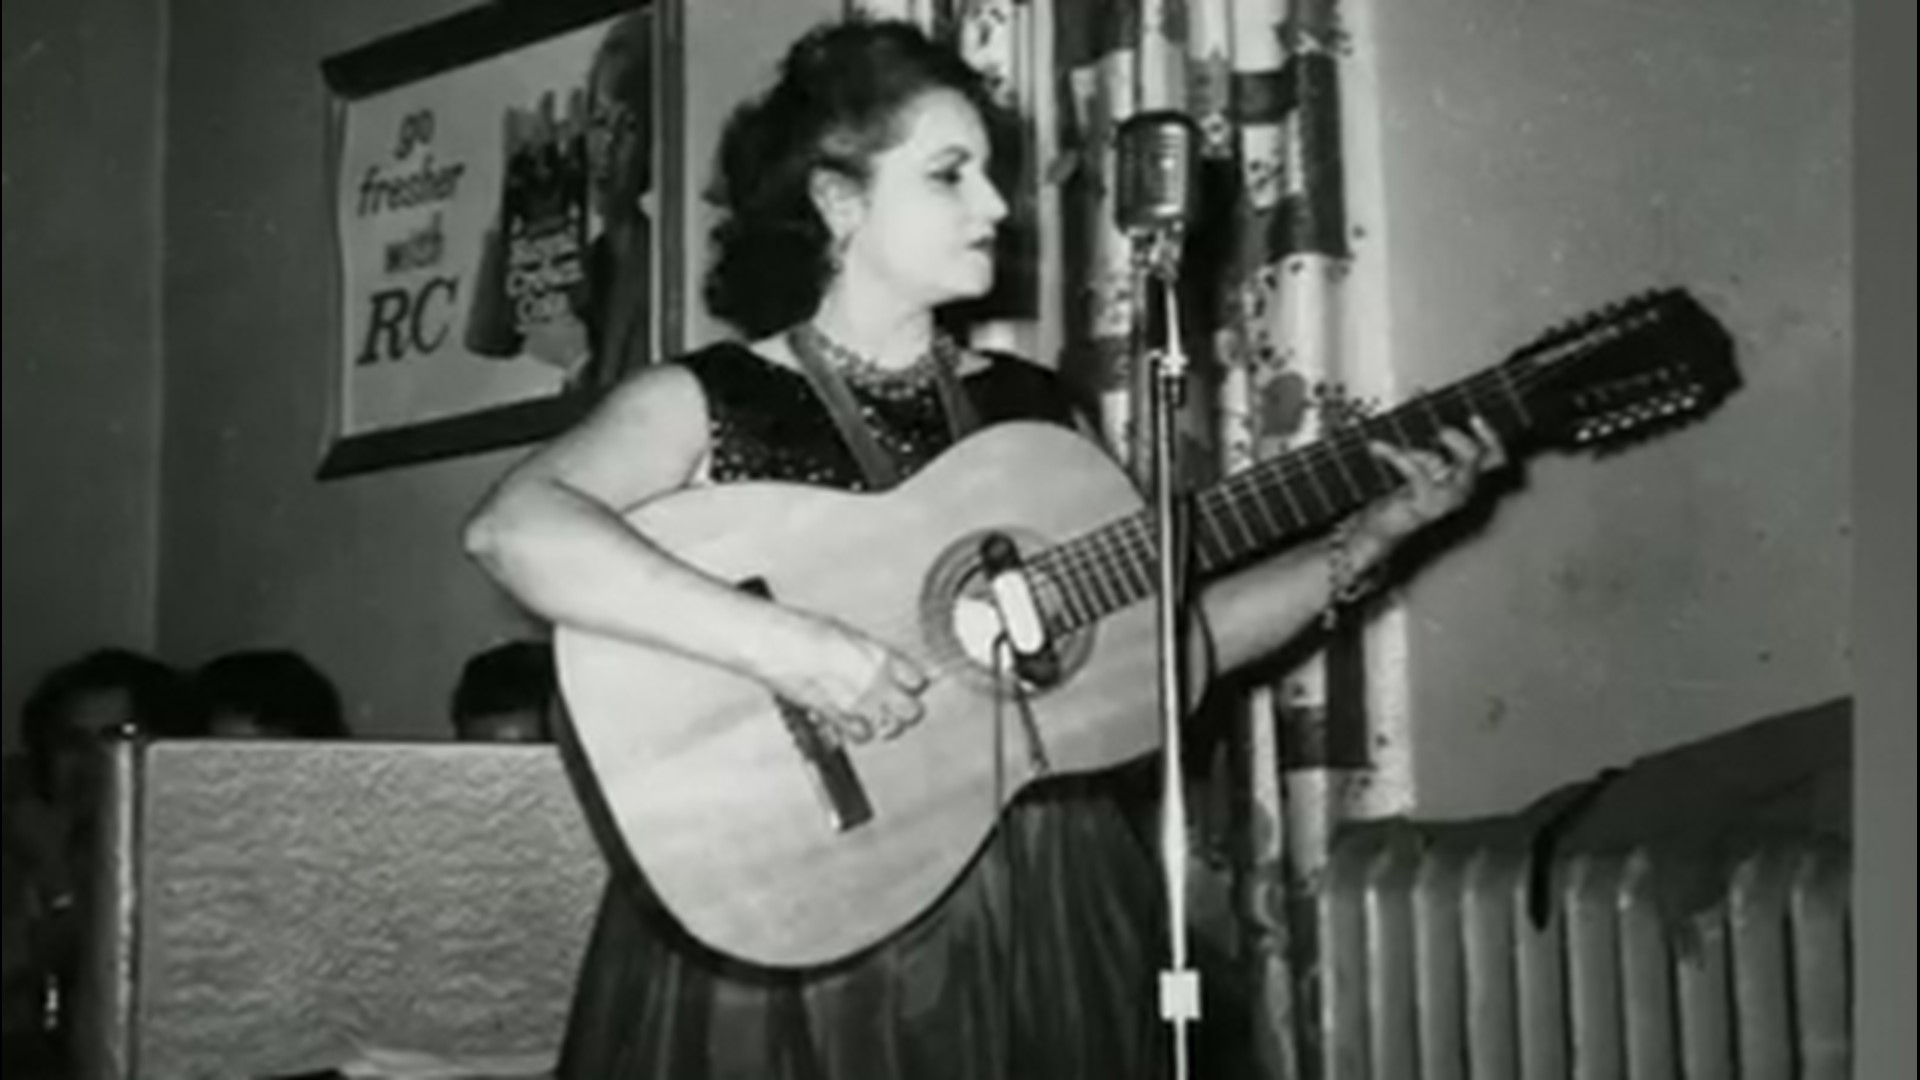 Lydia Mendoza had a career that spanned seven decades. She's considered the 'Mother of Tejano Music'